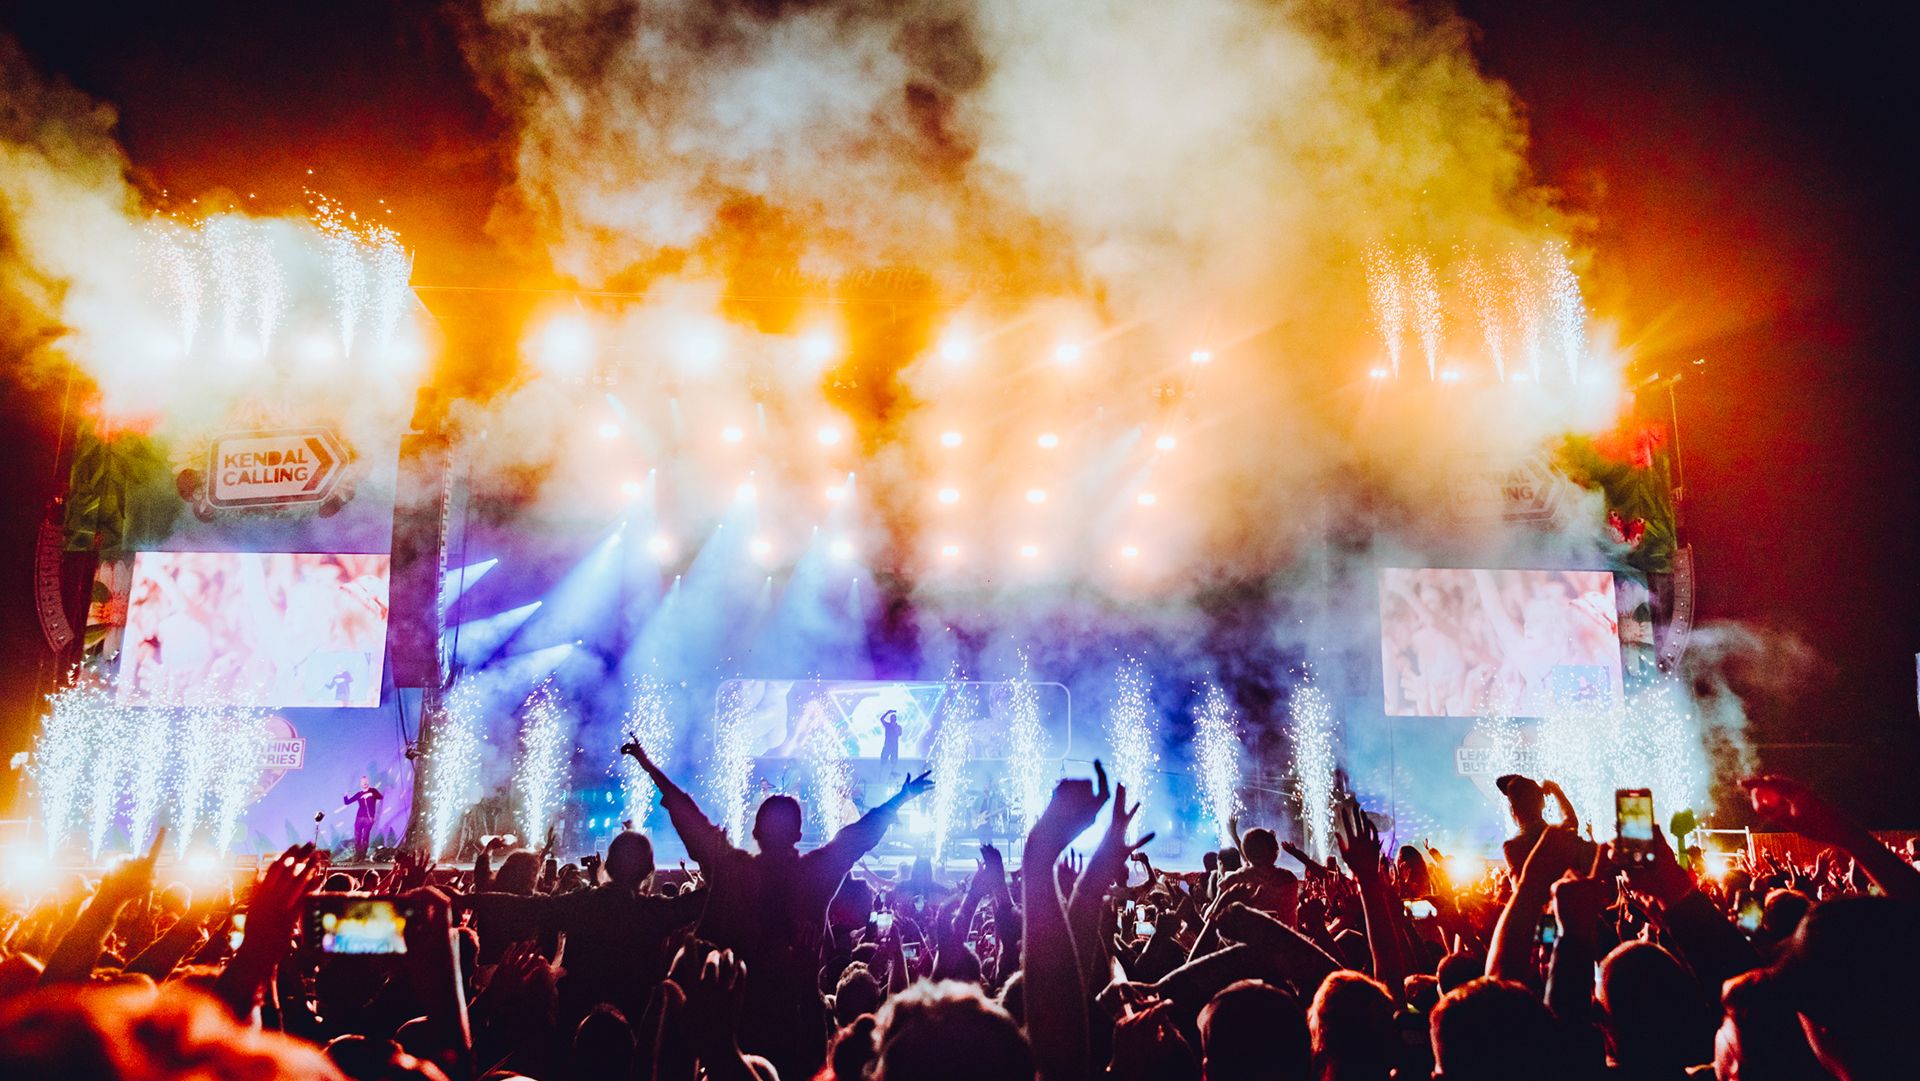 Kendal Calling: ticket prices, lineup and dates for 2023 edition